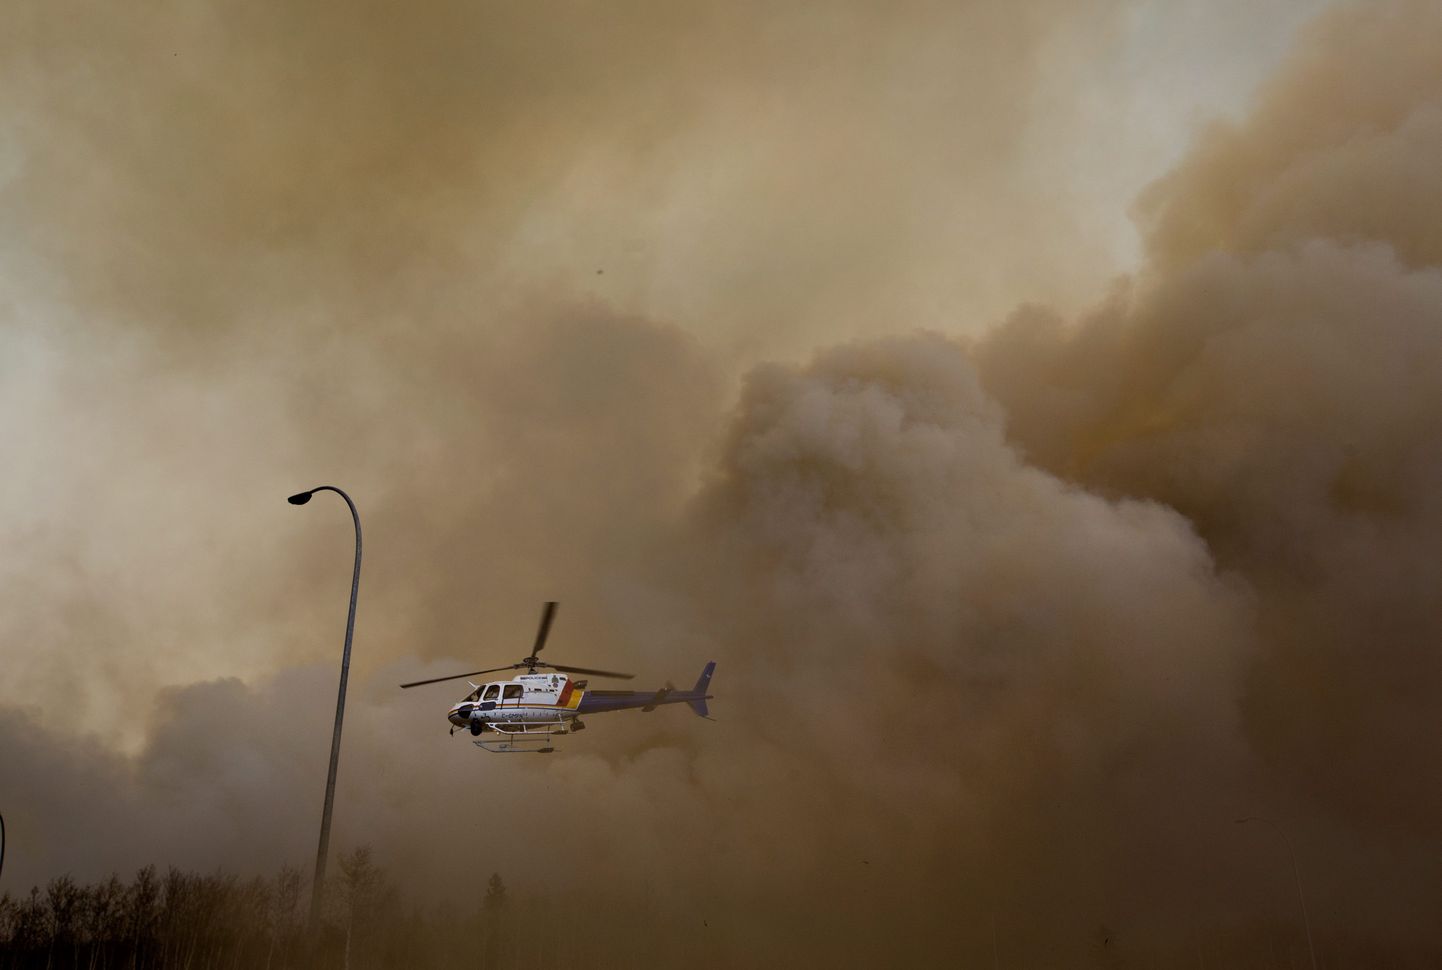 A police helicopter lifts off through dust and smoke near a wildfire in Fort McMurray, Alberta, Friday, May 6, 2016. Officials said shifting winds were giving the embattled northern Alberta city a break, but they added the fire that forced 80,000 people from their homes remained out of control and was likely to burn for weeks. (Jason Franson/The Canadian Press via AP)